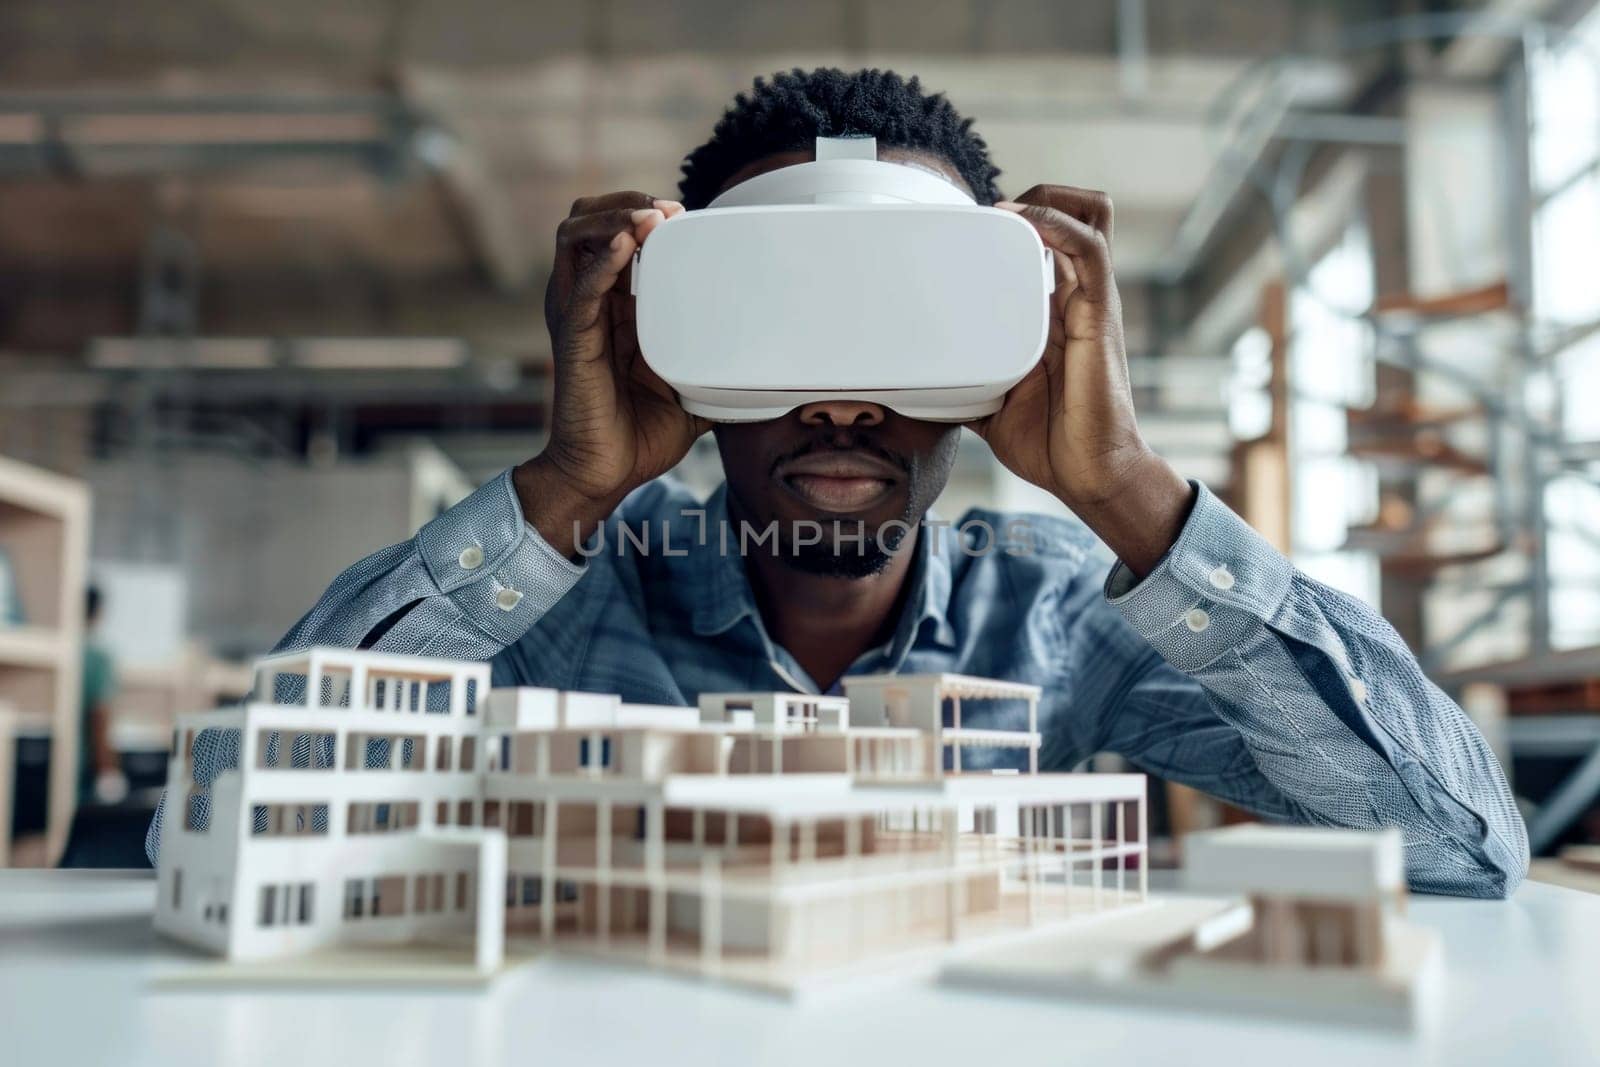 Concept futuristic design. Man is African american Architect or Engineer wearing VR headset for working design by golfmerrymaker